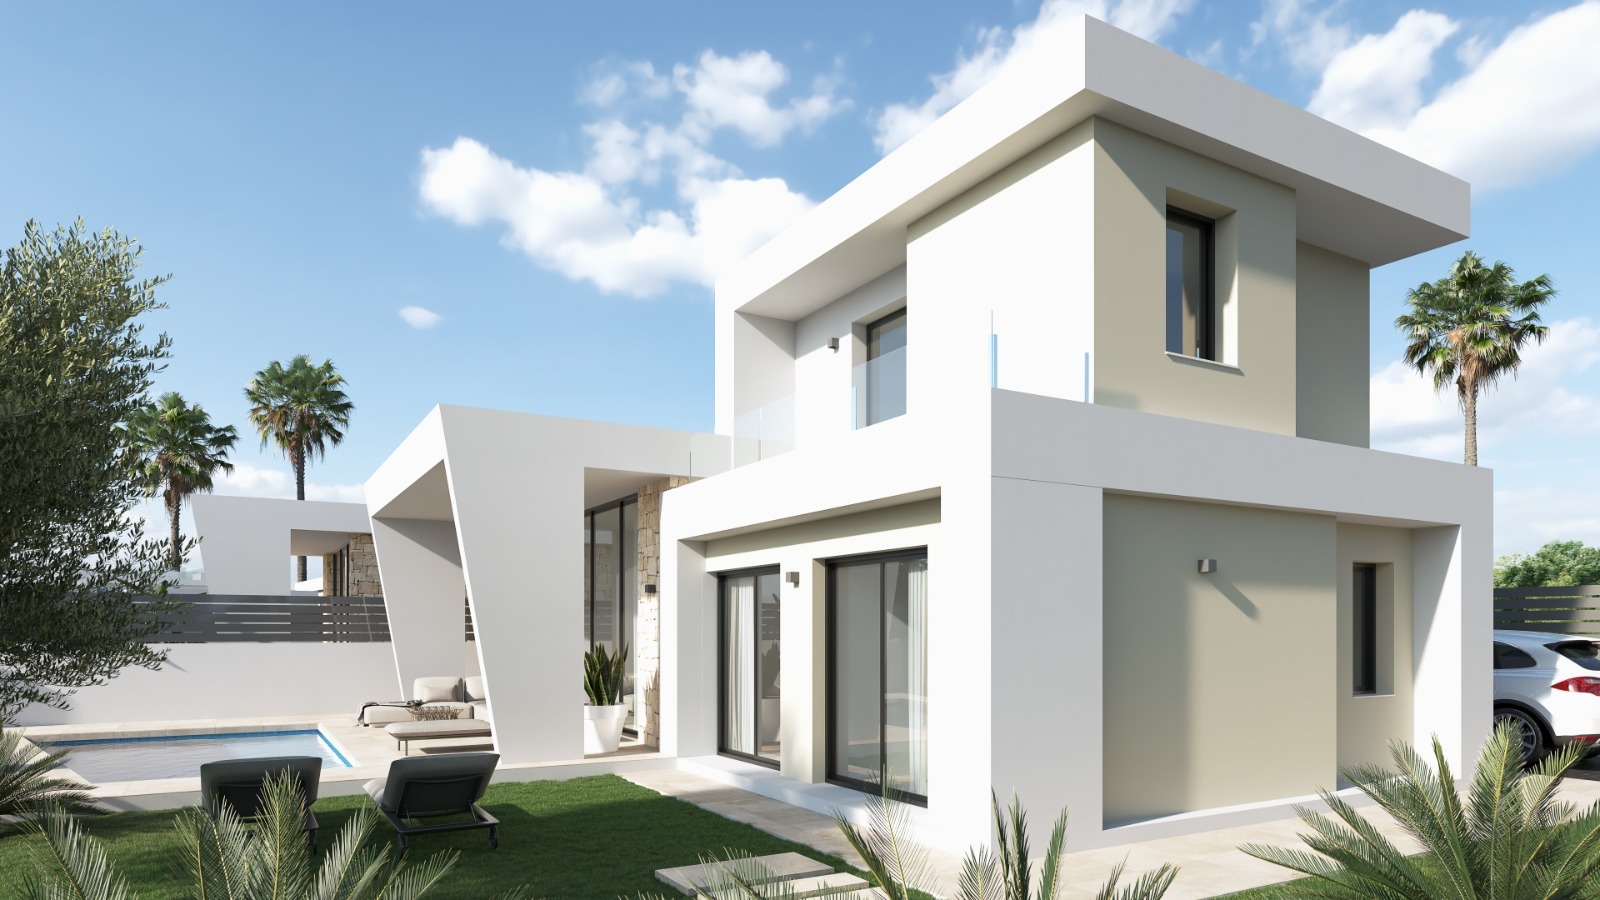 New build villas for sale in the most residential area near the salt lakes in Torrevieja.